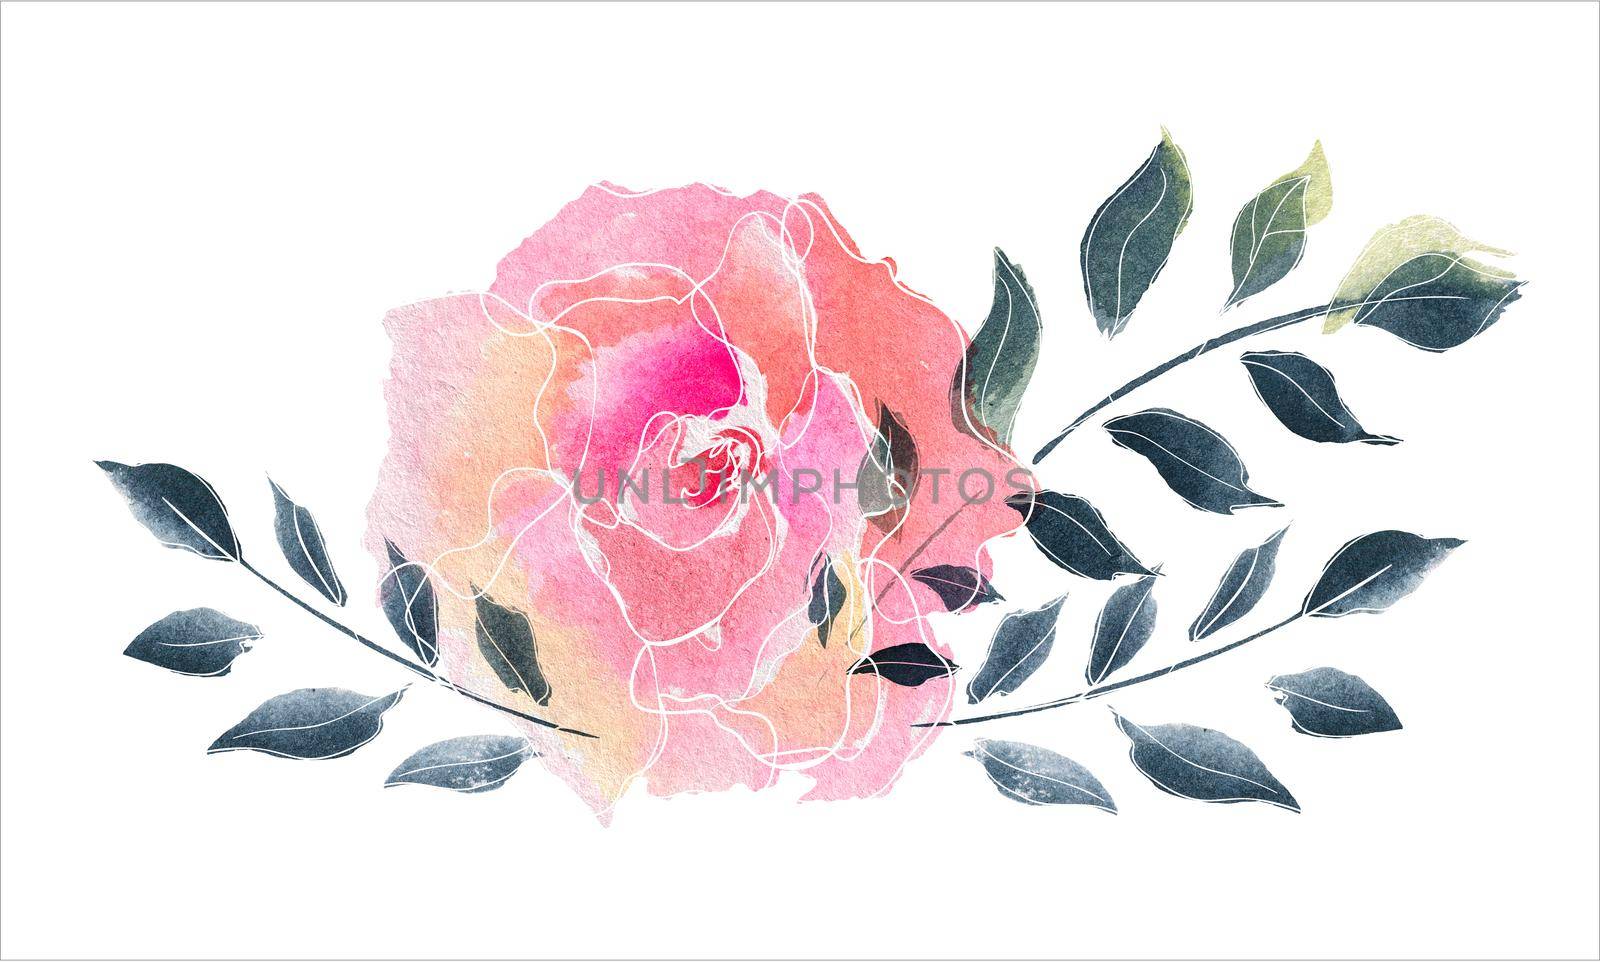 Rose bouquet. Watercolor floral composition by Xeniasnowstorm